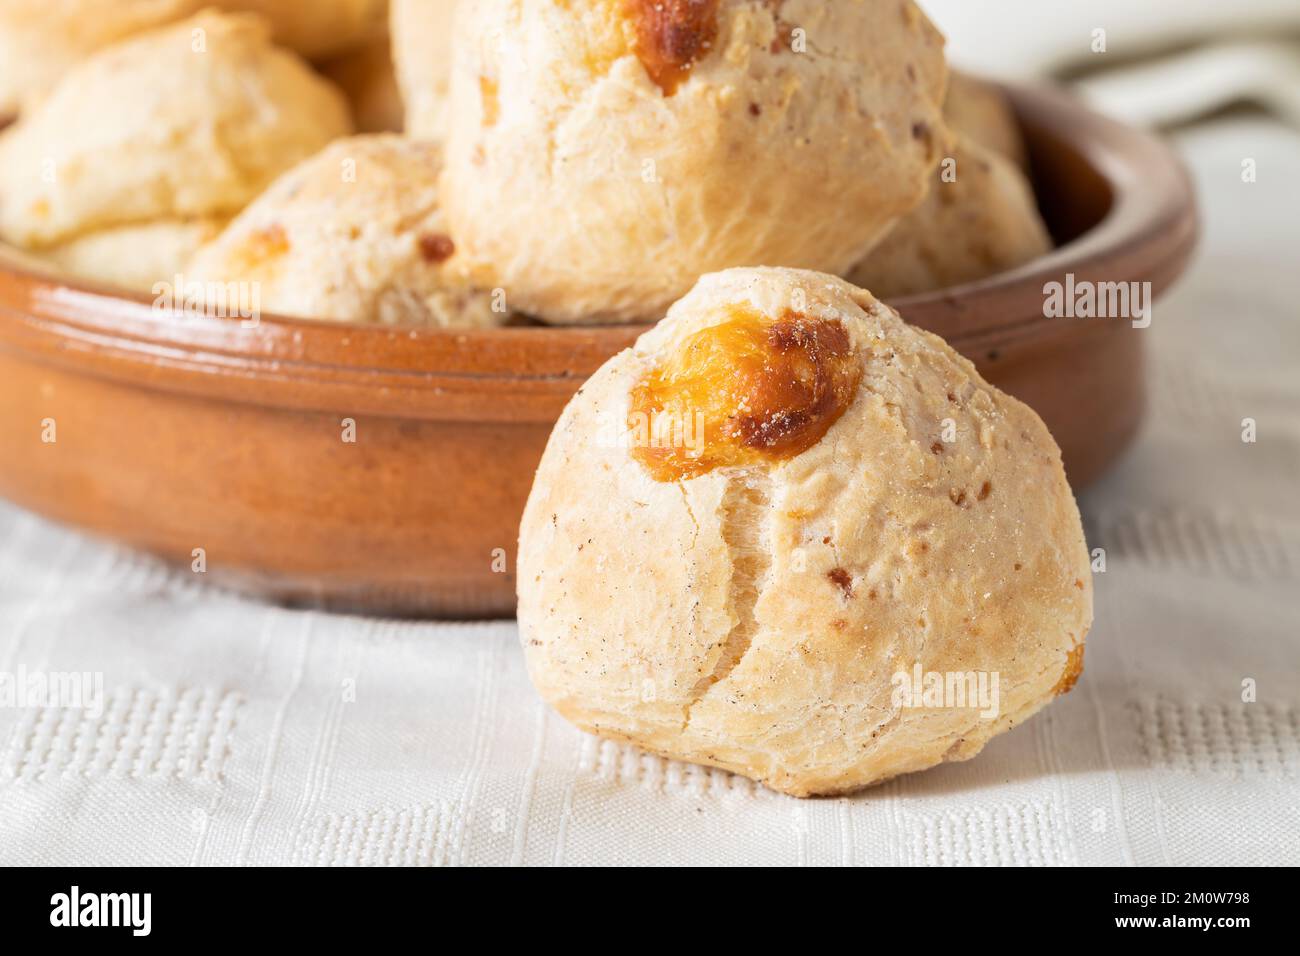 Close up of a chipa, typical Paraguayan cheese bread. Stock Photo